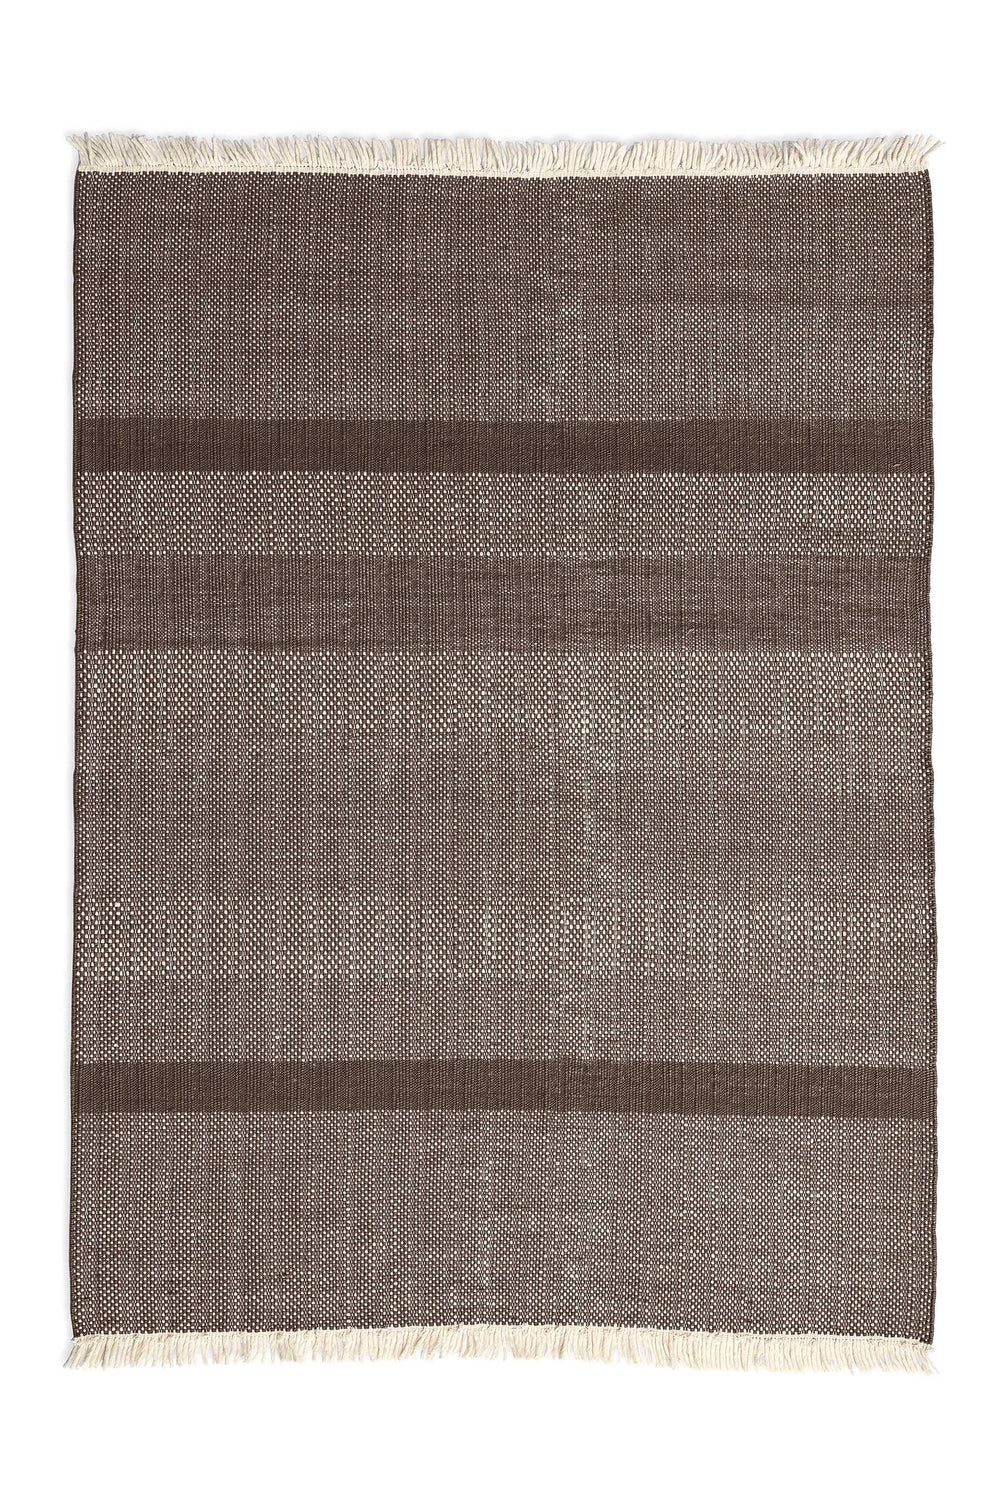 Tres Texture Pearl Rug